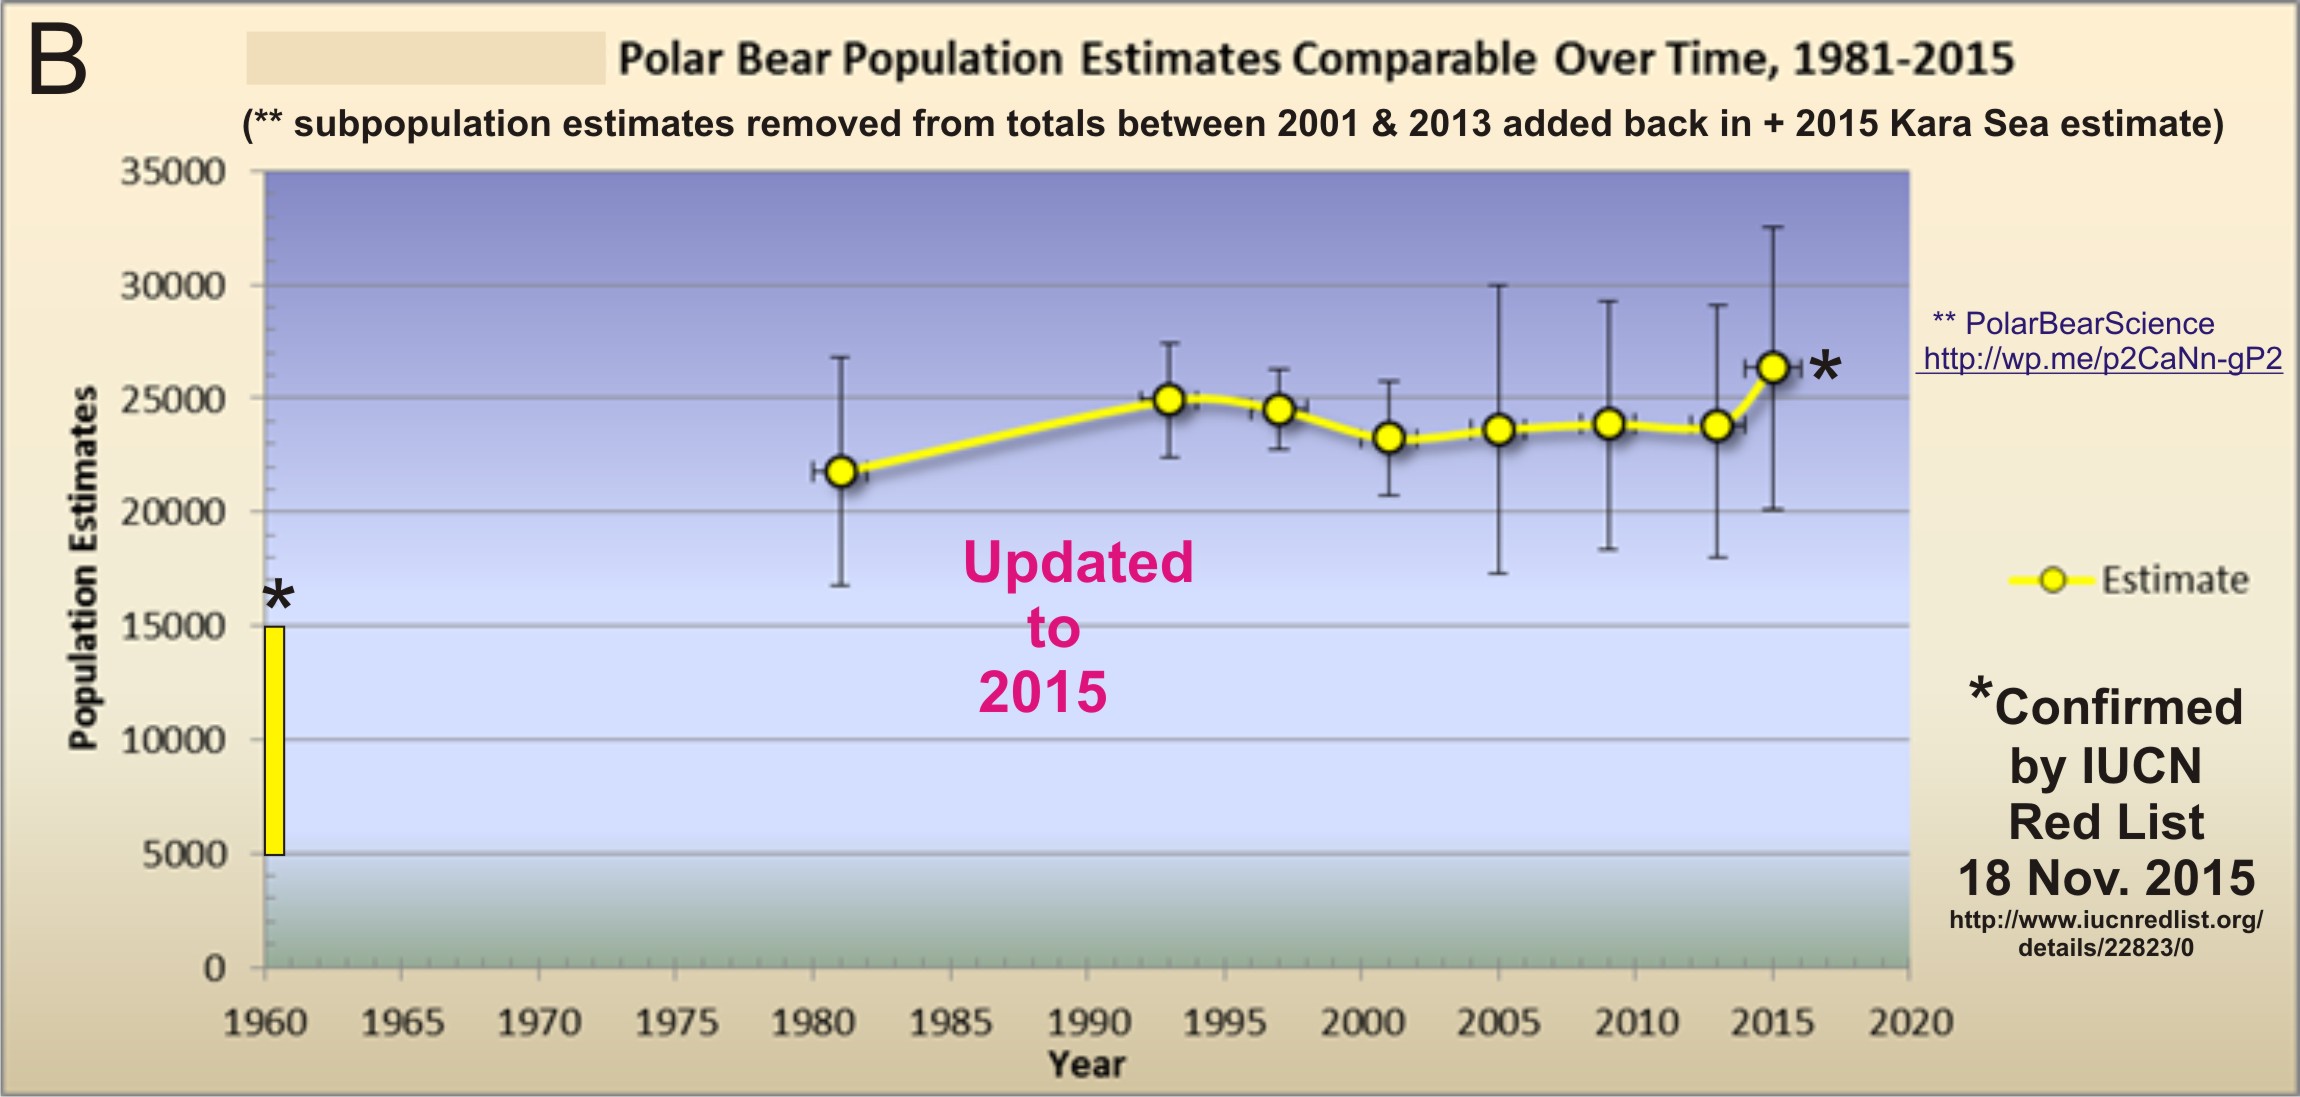 Crockford OFFICIAL polar bear numbers to 2015_IUCN concurrs Nov 18